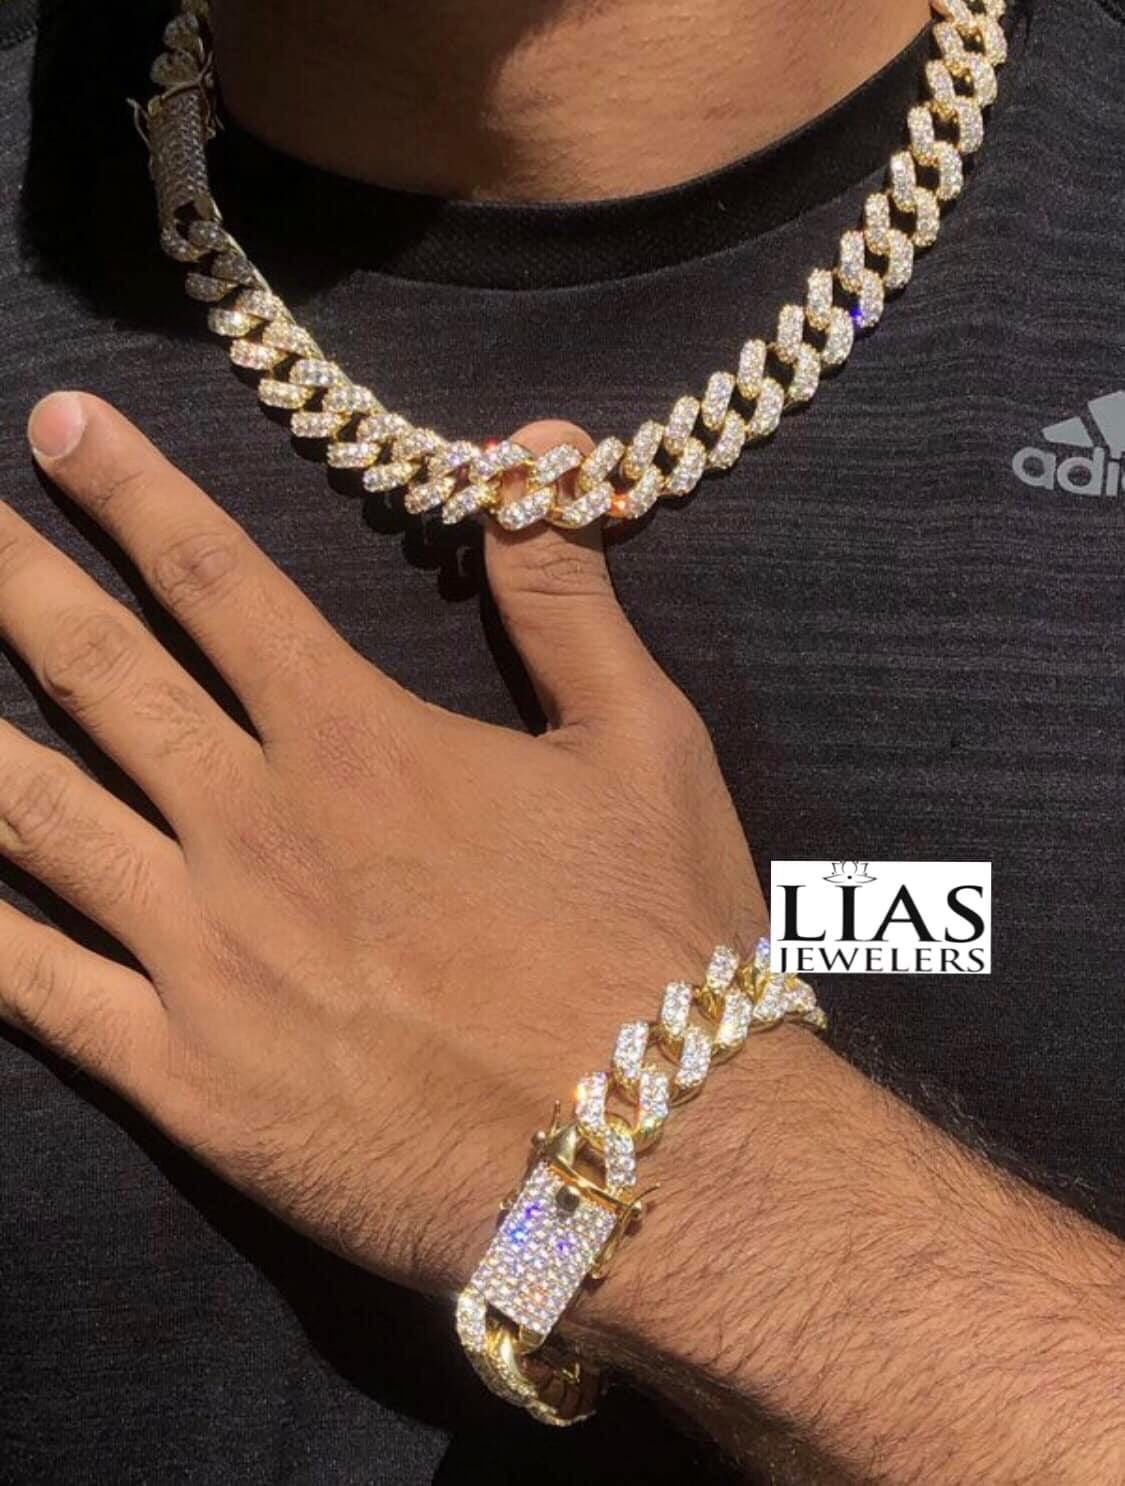 New 18 k yellow gold Cuban link chain and bracelet